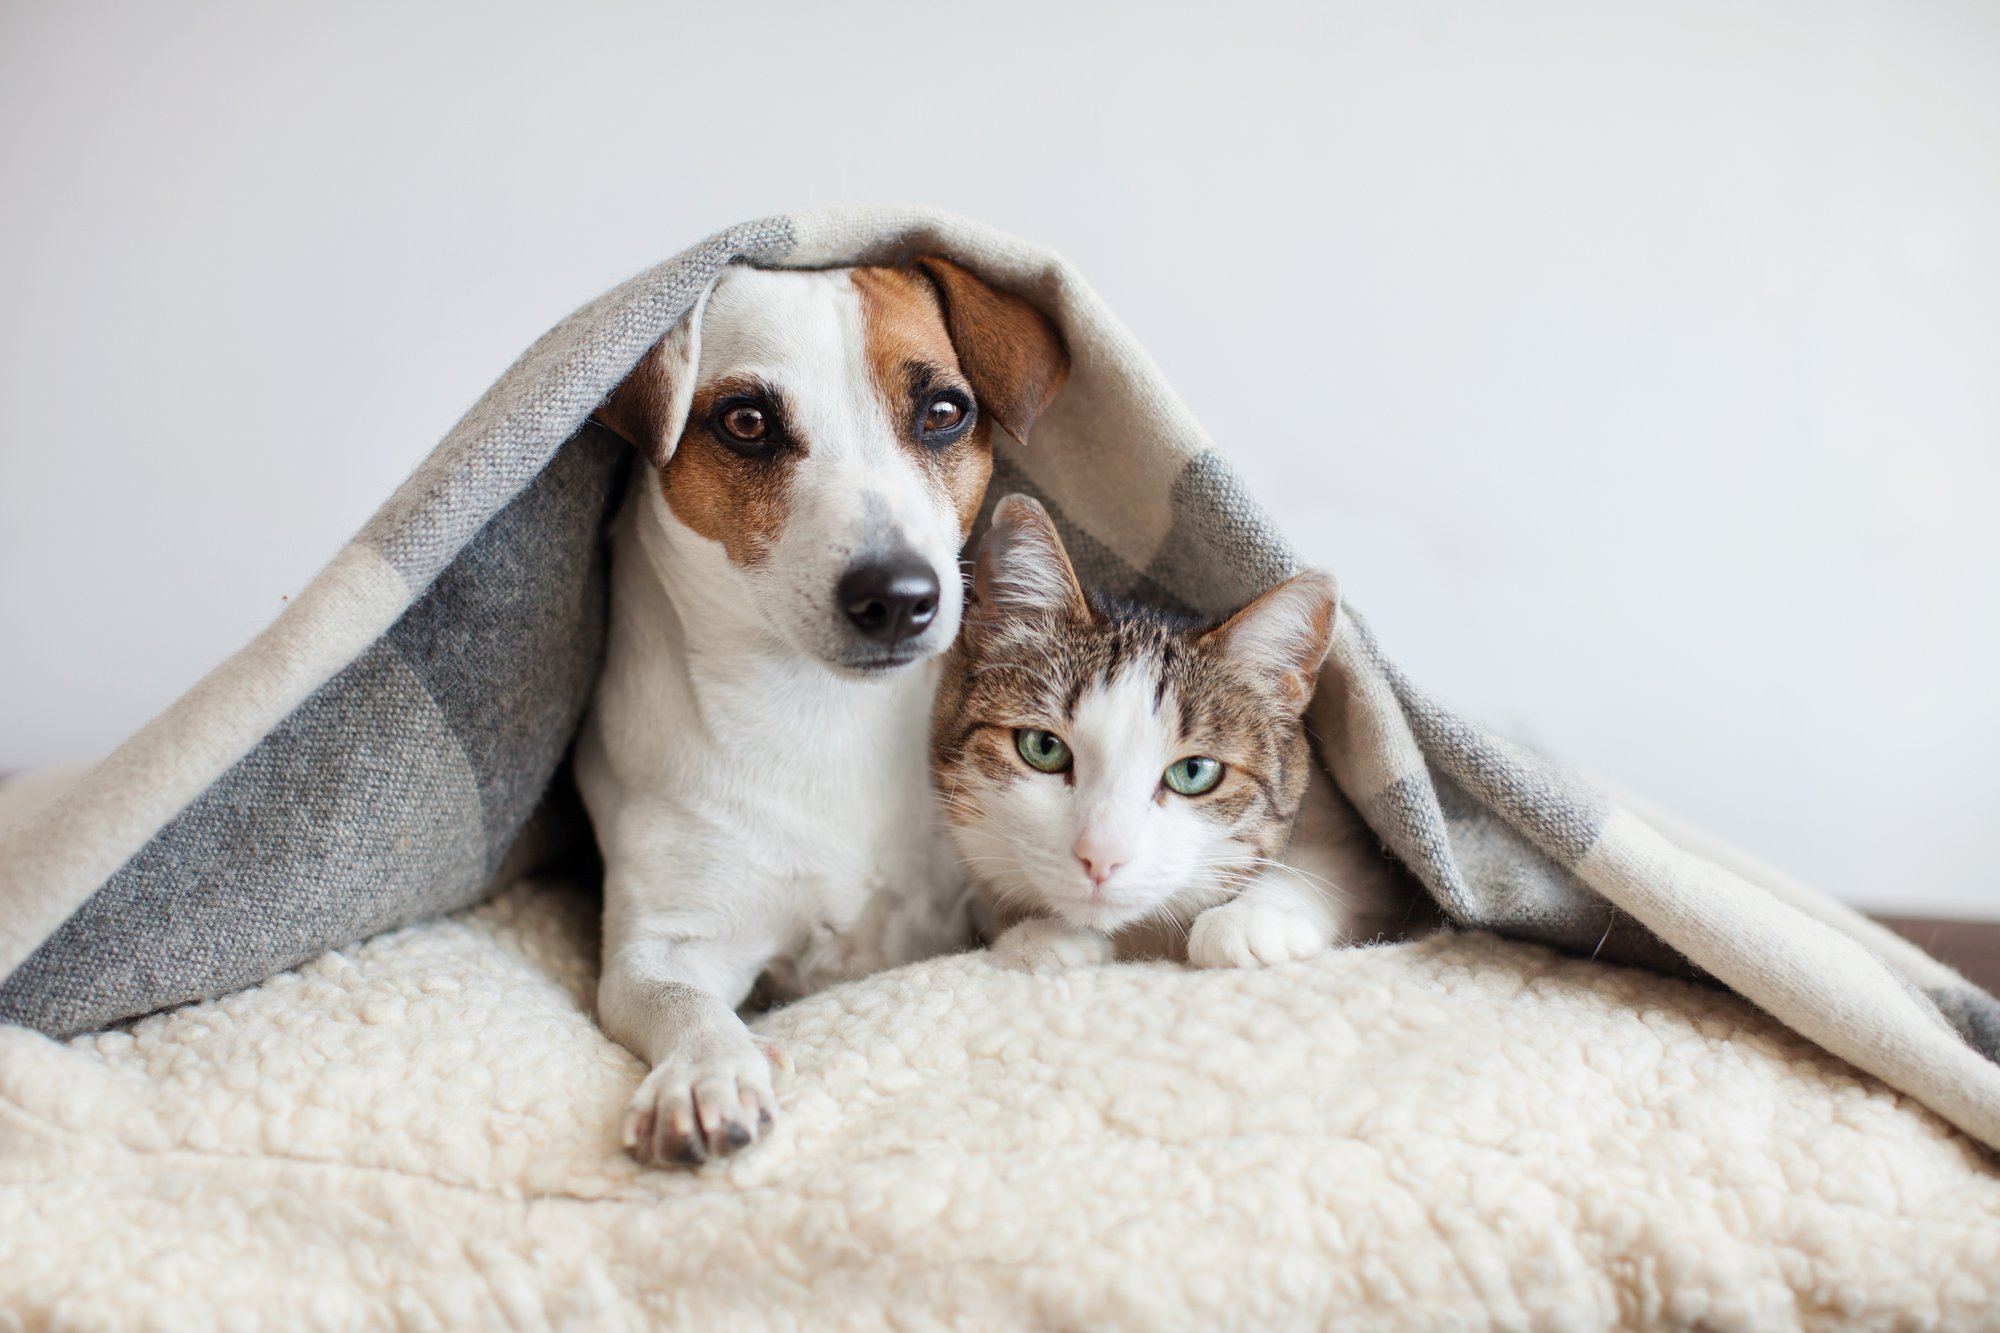 Keeping it Fur-iendly: Cats & Dogs Living Together